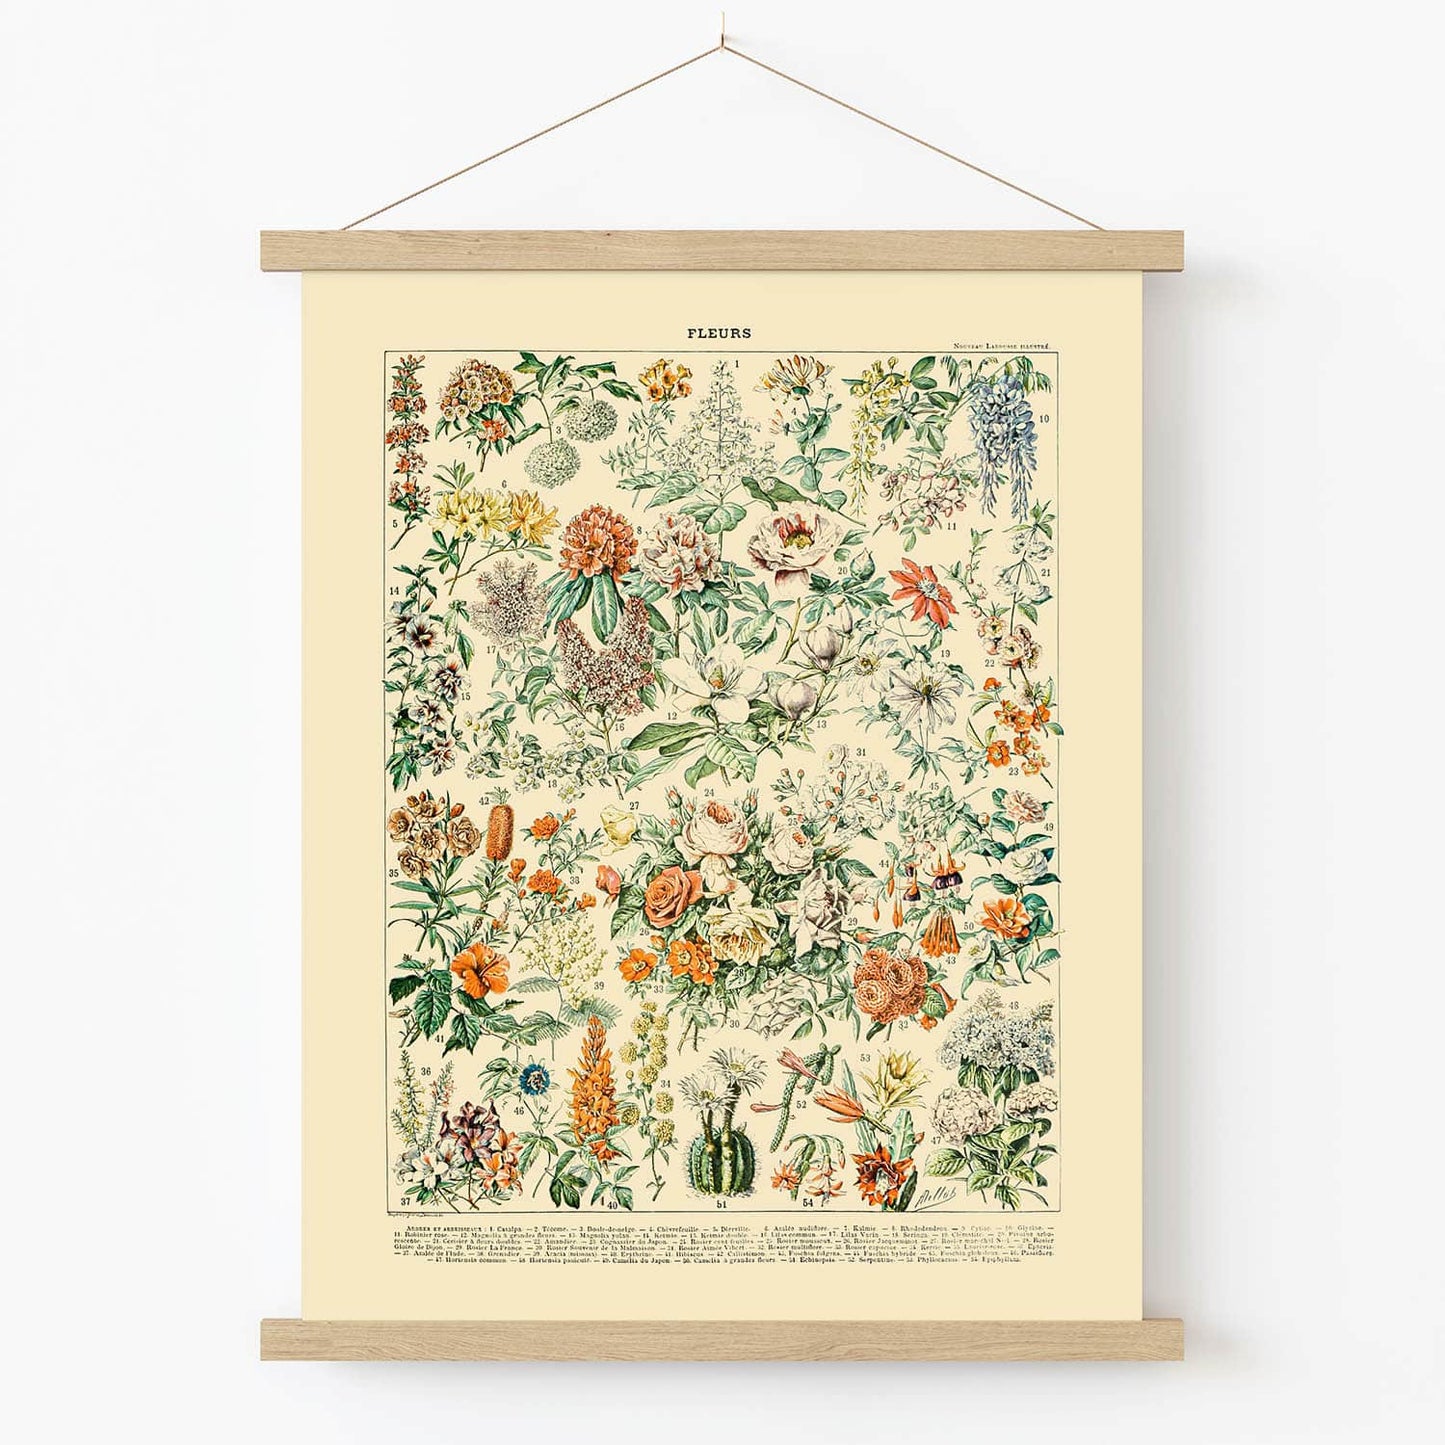 Flowers and Plants Art Print in Wood Hanger Frame on Wall